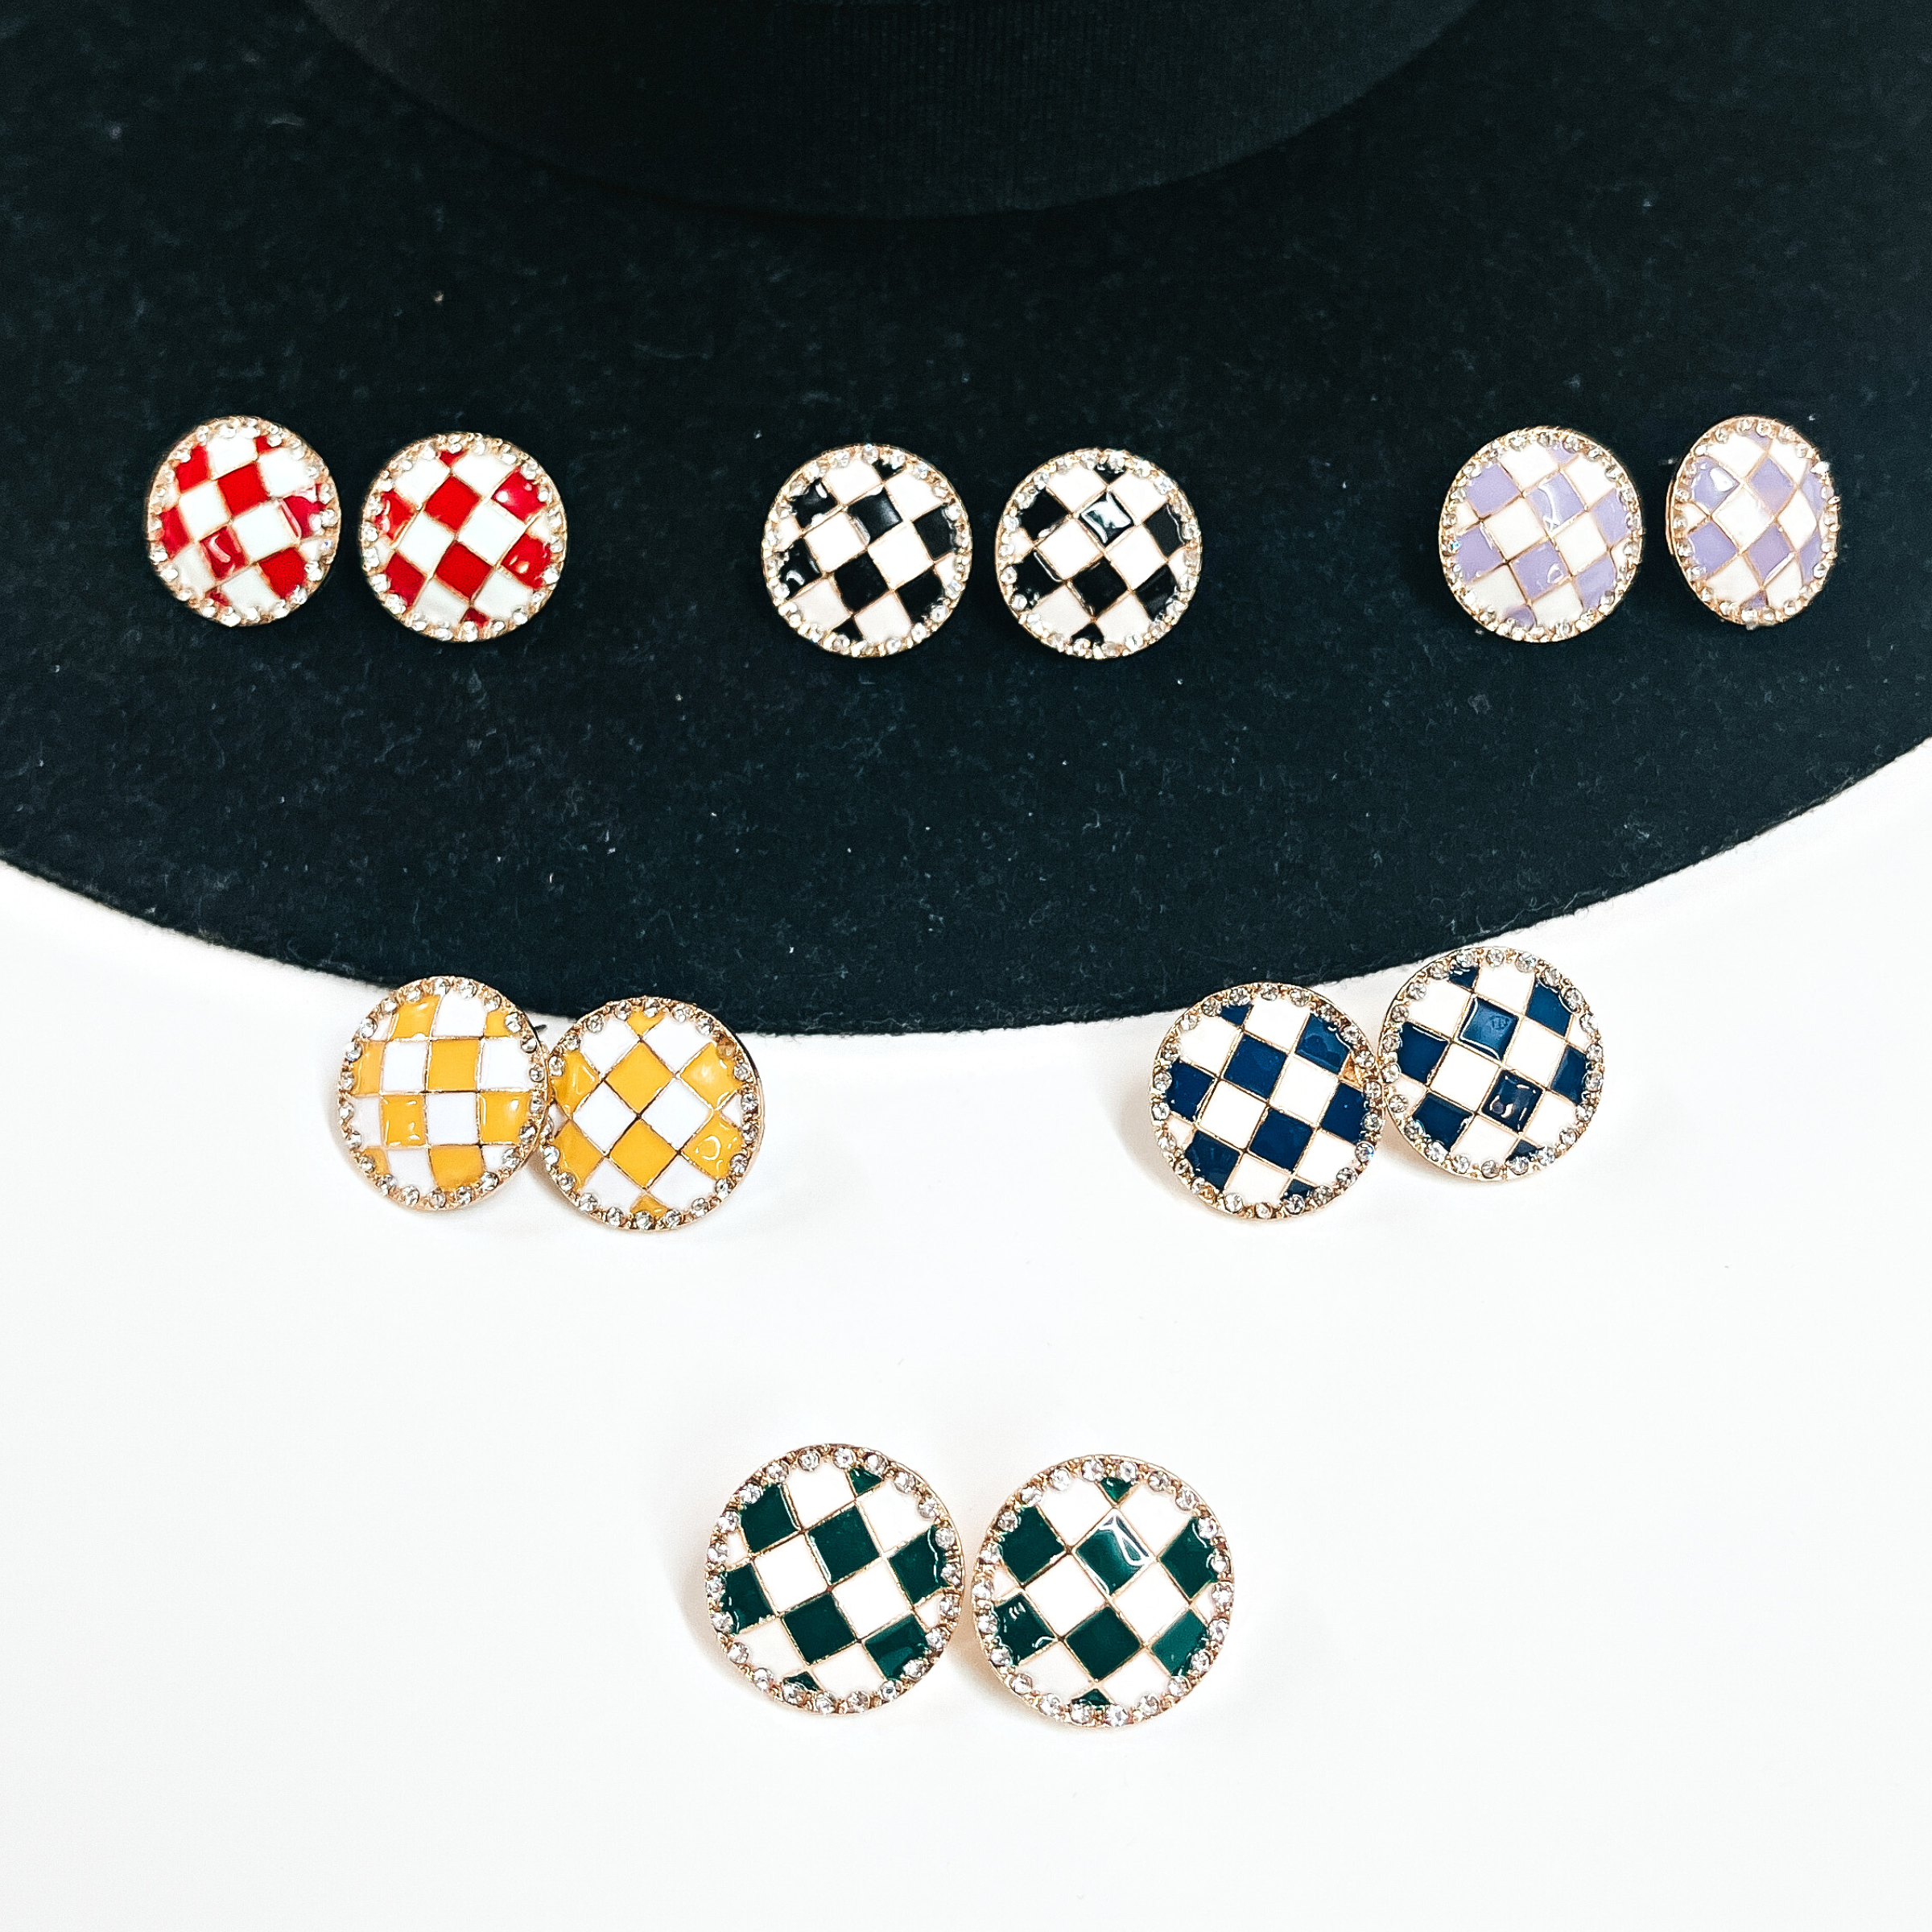 There are six pairs of checkered patterned stud earrings in different colors. The top row is red/white, black/white, and light purple/white. Middle row is yellow/white and navy blue/white, bottom pair is green/white. All of these earrings are in a gold setting with clear crystals all around. These earrings are forming a pyramid, laying on a black felt hat brim and on a white background.